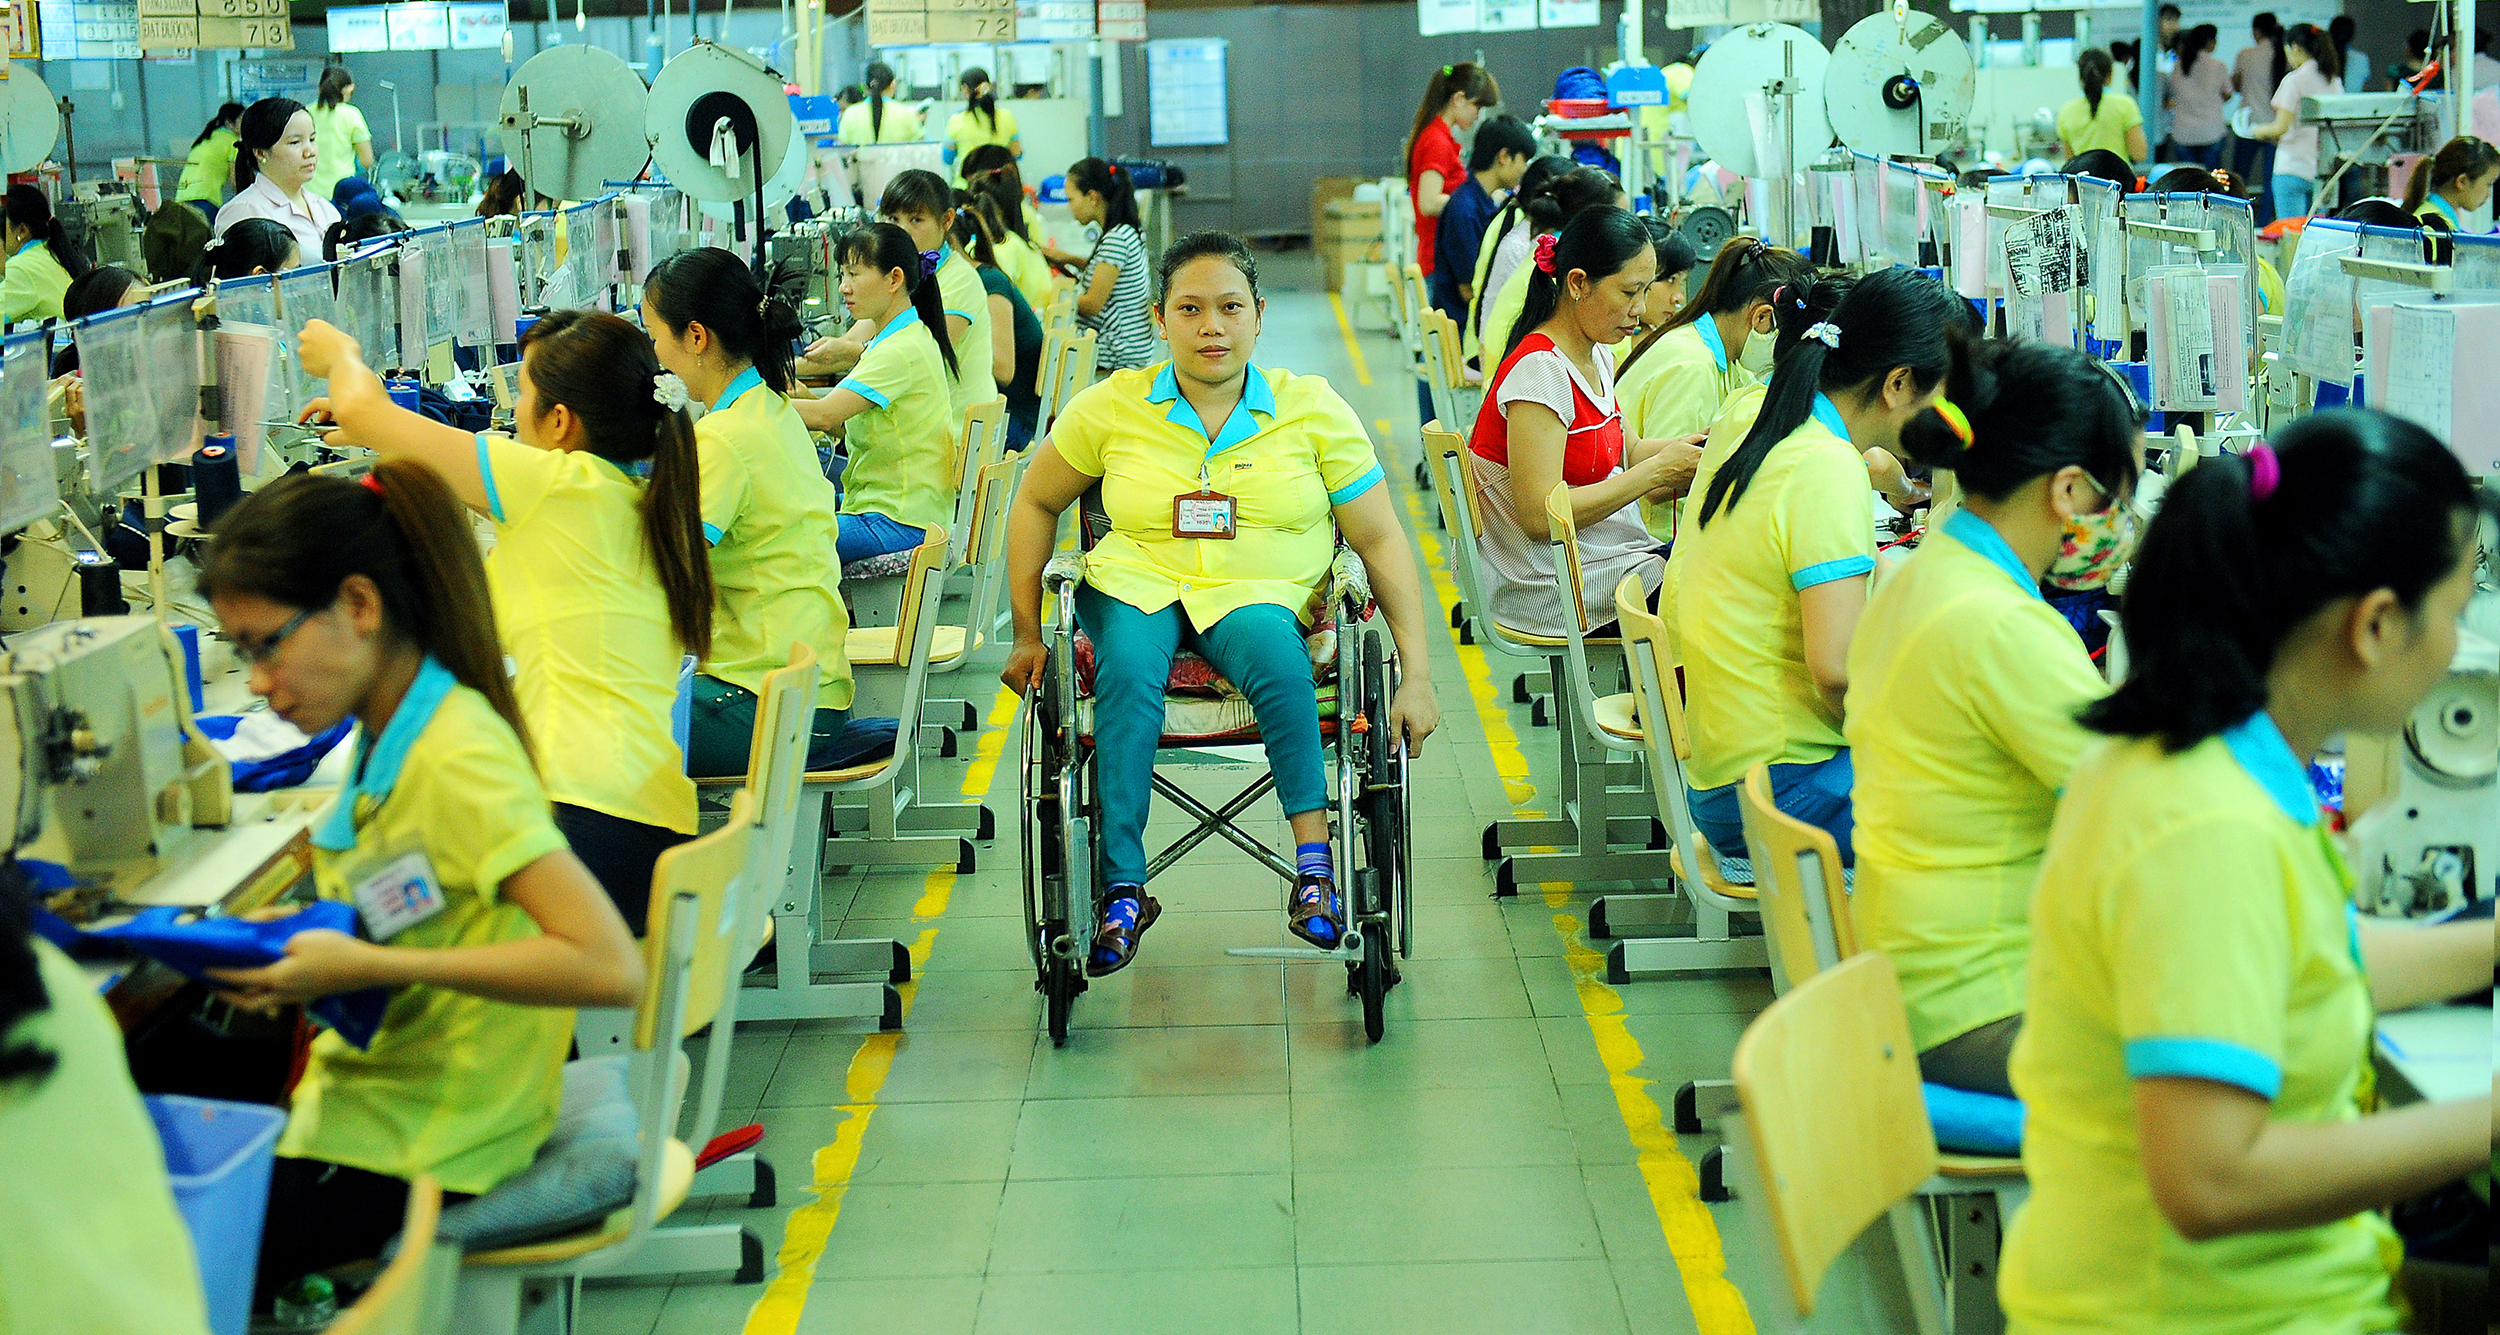 Factory workers in yellow uniform working with sewing machines with one worker in a wheelchair